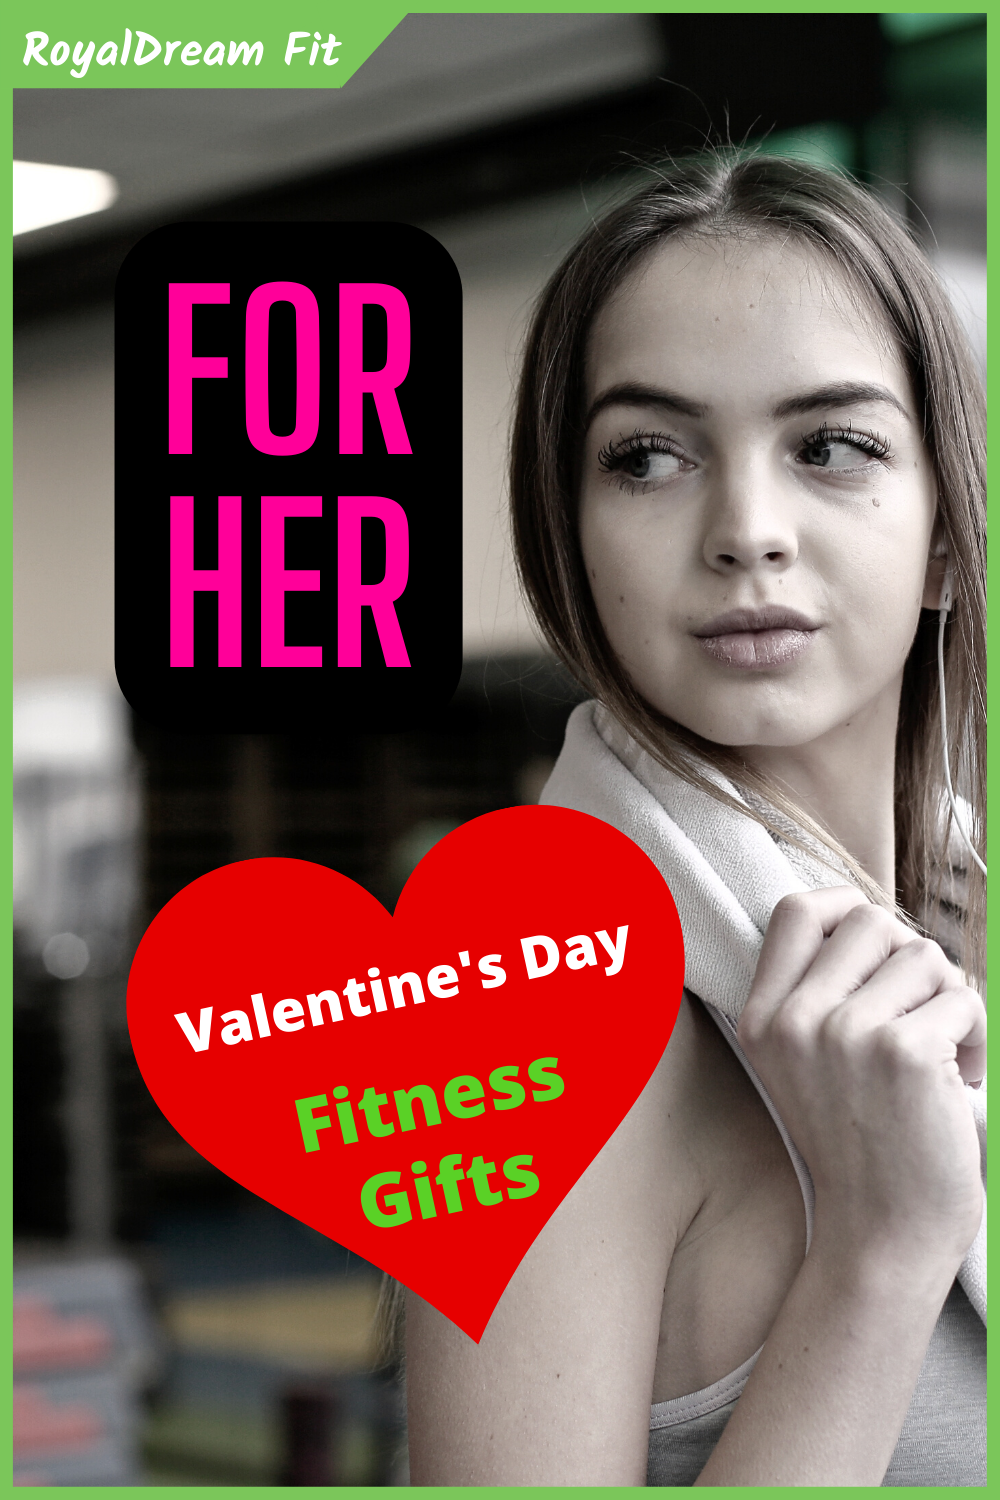 Unique Valentine's Day Gifts for your fit woman!